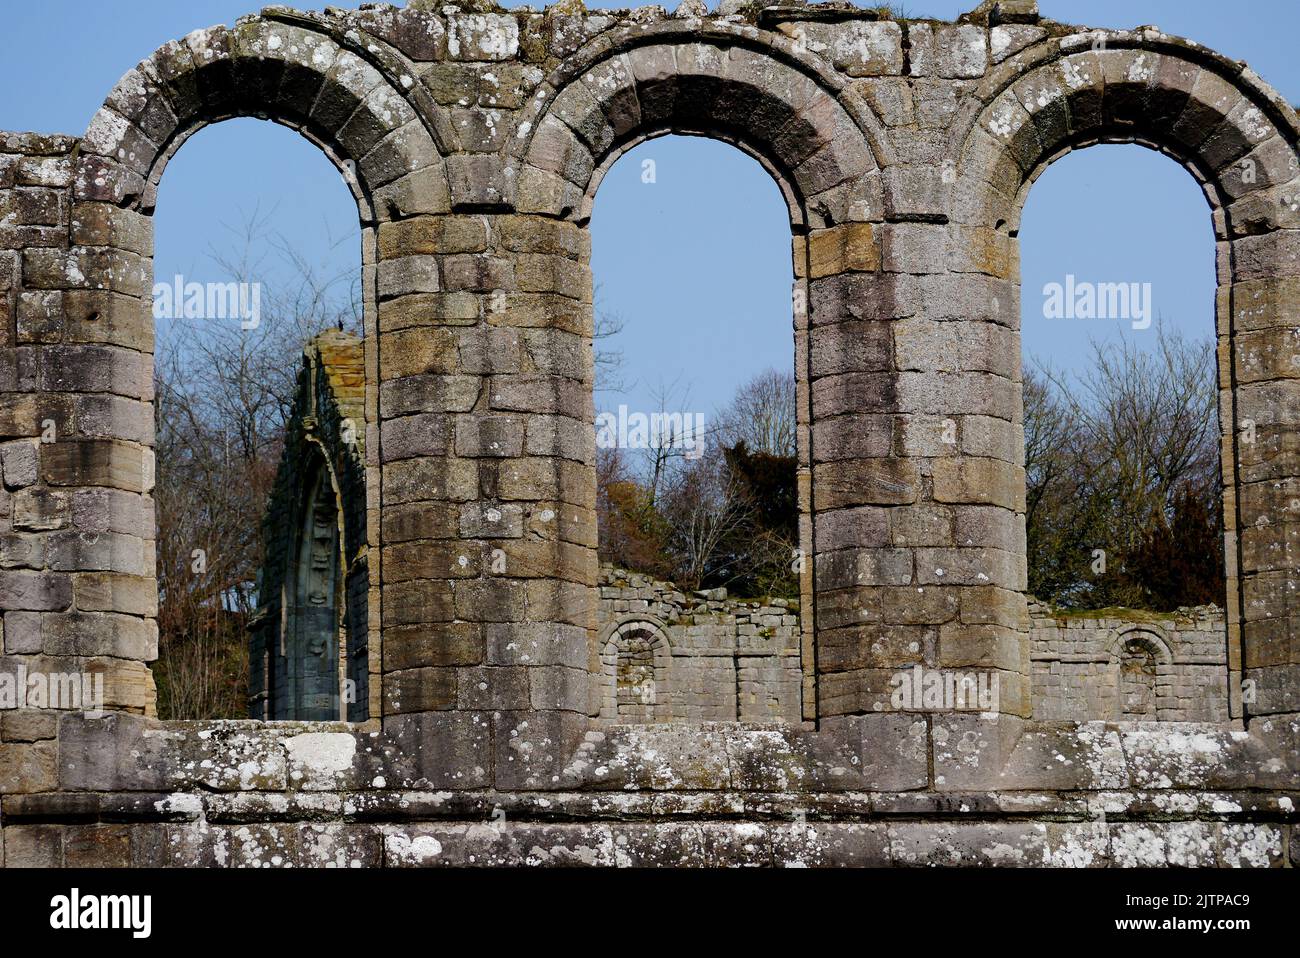 The Remains of Three Old Stone Arched Windows in the Ruins of Fountains Abbey Cistercian Monastery, North Yorkshire, England, UK. Stock Photo